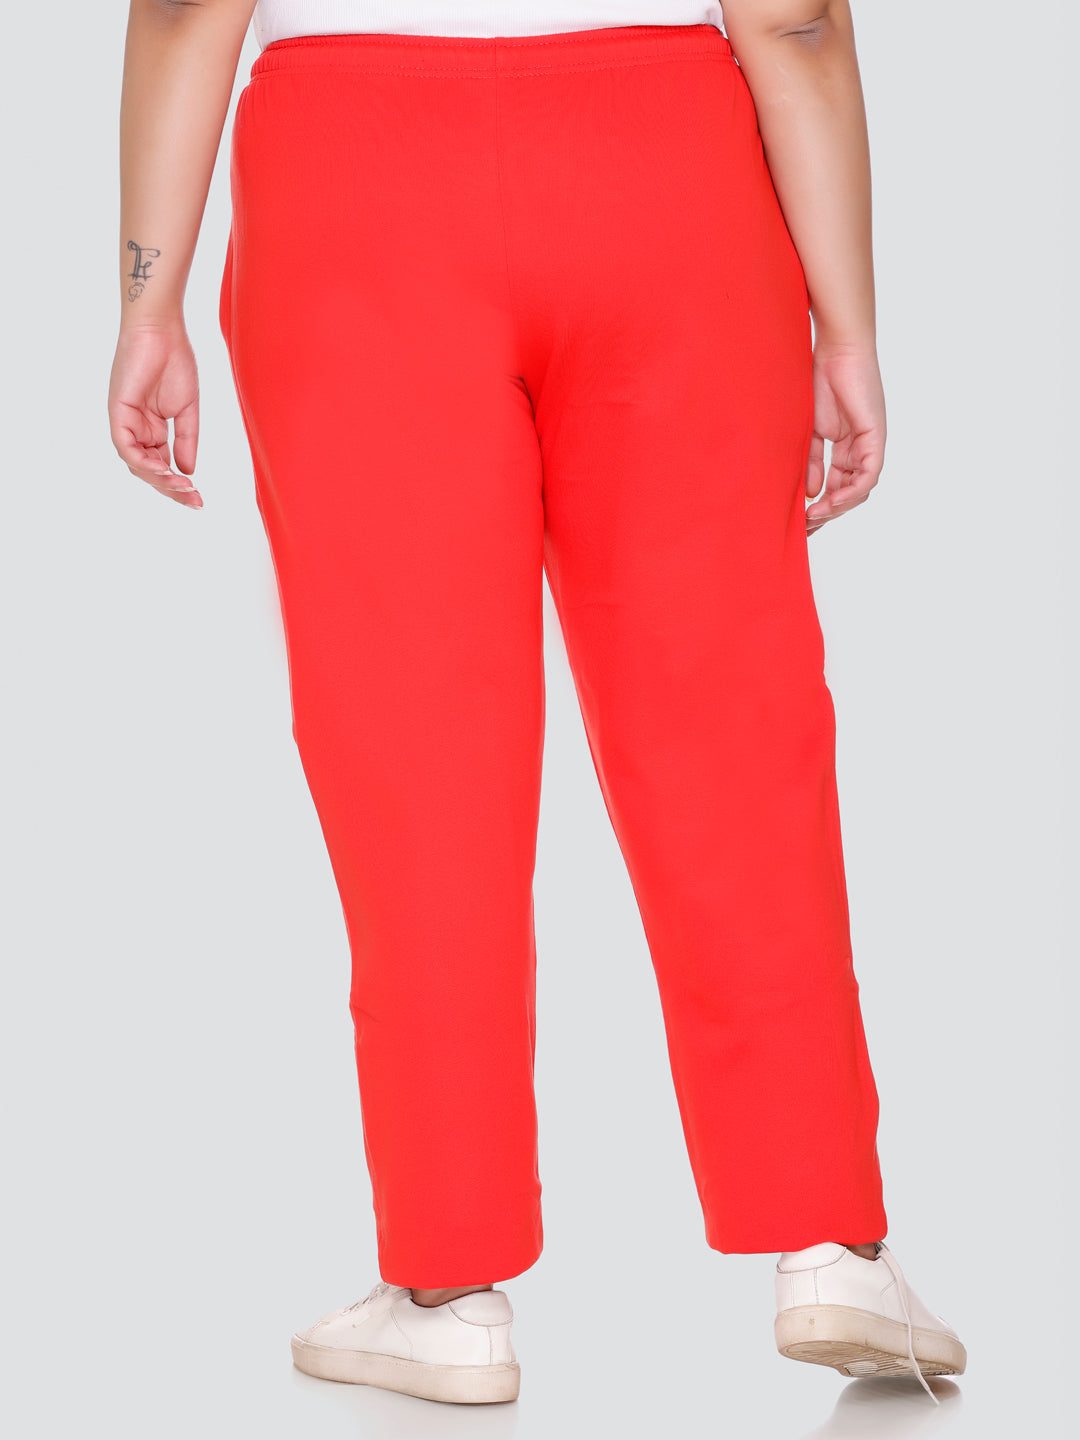 Buy Winter Cotton Wear Fleece Red Track pants for Women online at best  Prices by Cupidclothings – Cupid Clothings